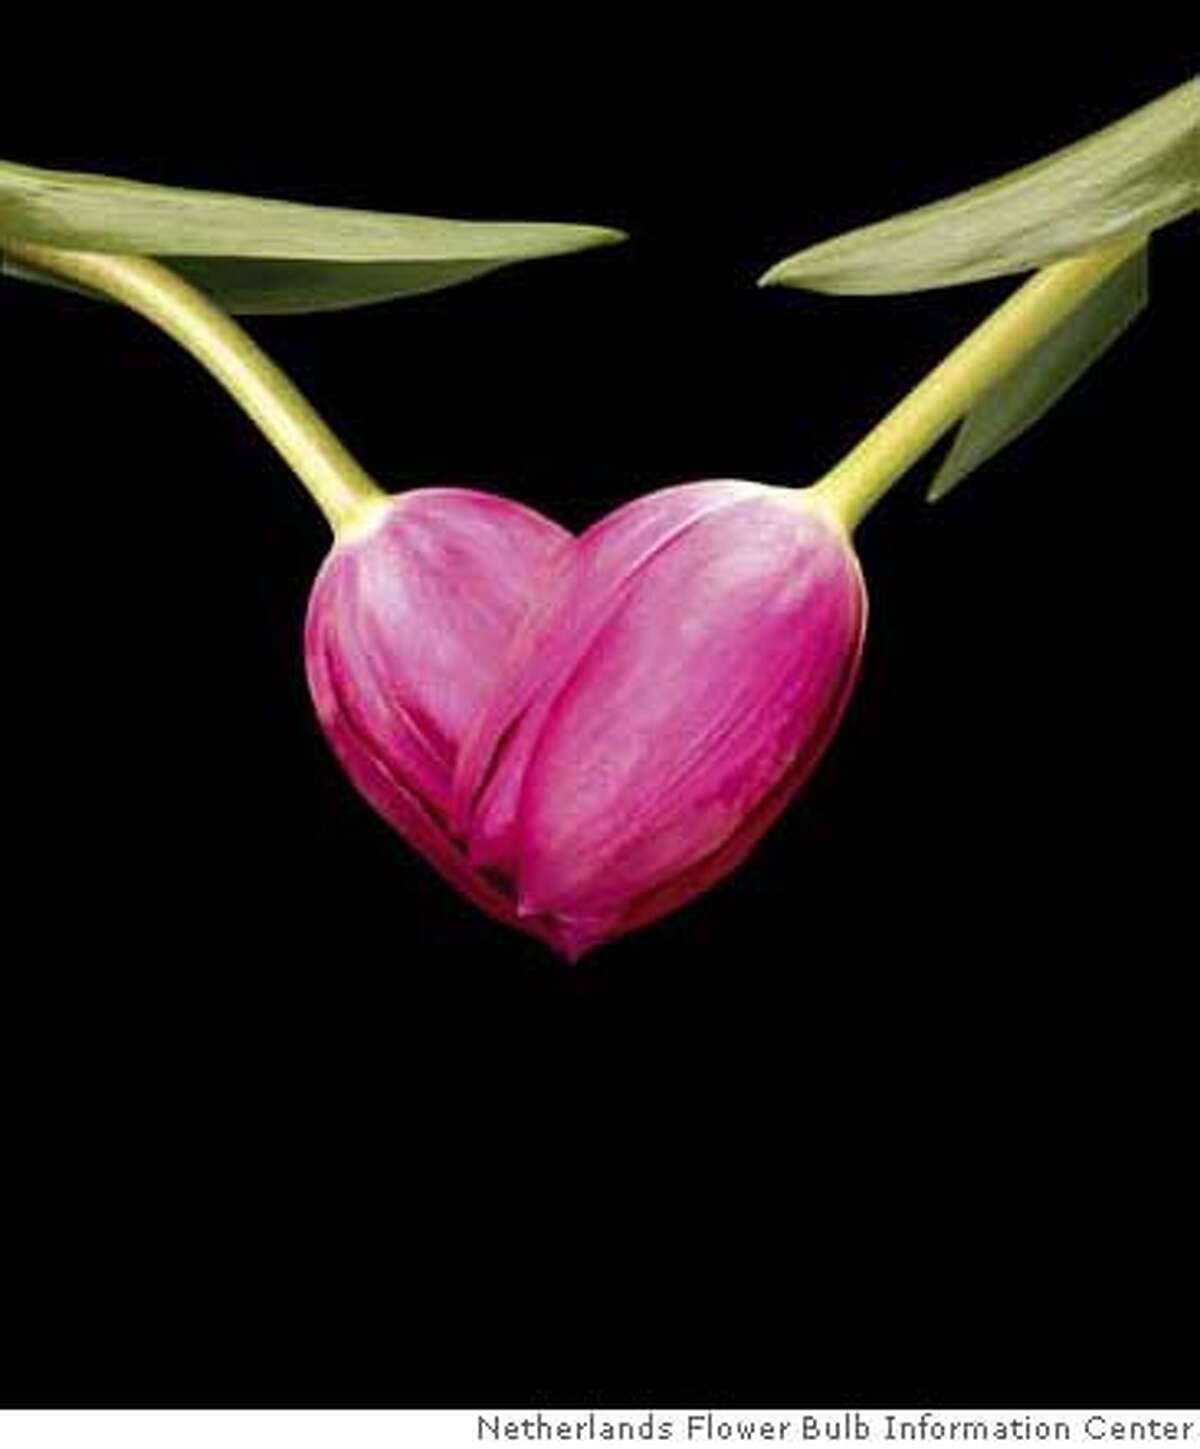 Two tulips meet in a sweet heart shape, too lovely! Guys who visit www.savedbythebud.com will learn how to win hearts and meet girls with cut flowers and potted flowering plants as their allies. The new Web guide from the Netherlands Flower Bulb Information Center in Danby, VT takes a sassy approach to teaching guys everything they need to know about using flowers strategically to improve their love lives. (PRNewsFoto/Netherlands Flower Bulb Information Center) XPRES # SEE STORY 20080124/NYFNSE05-a, NY Media contact: Sally Ferguson, Netherlands Flower Bulb Information Center, +1-802-293-2852, press@bulb.com.